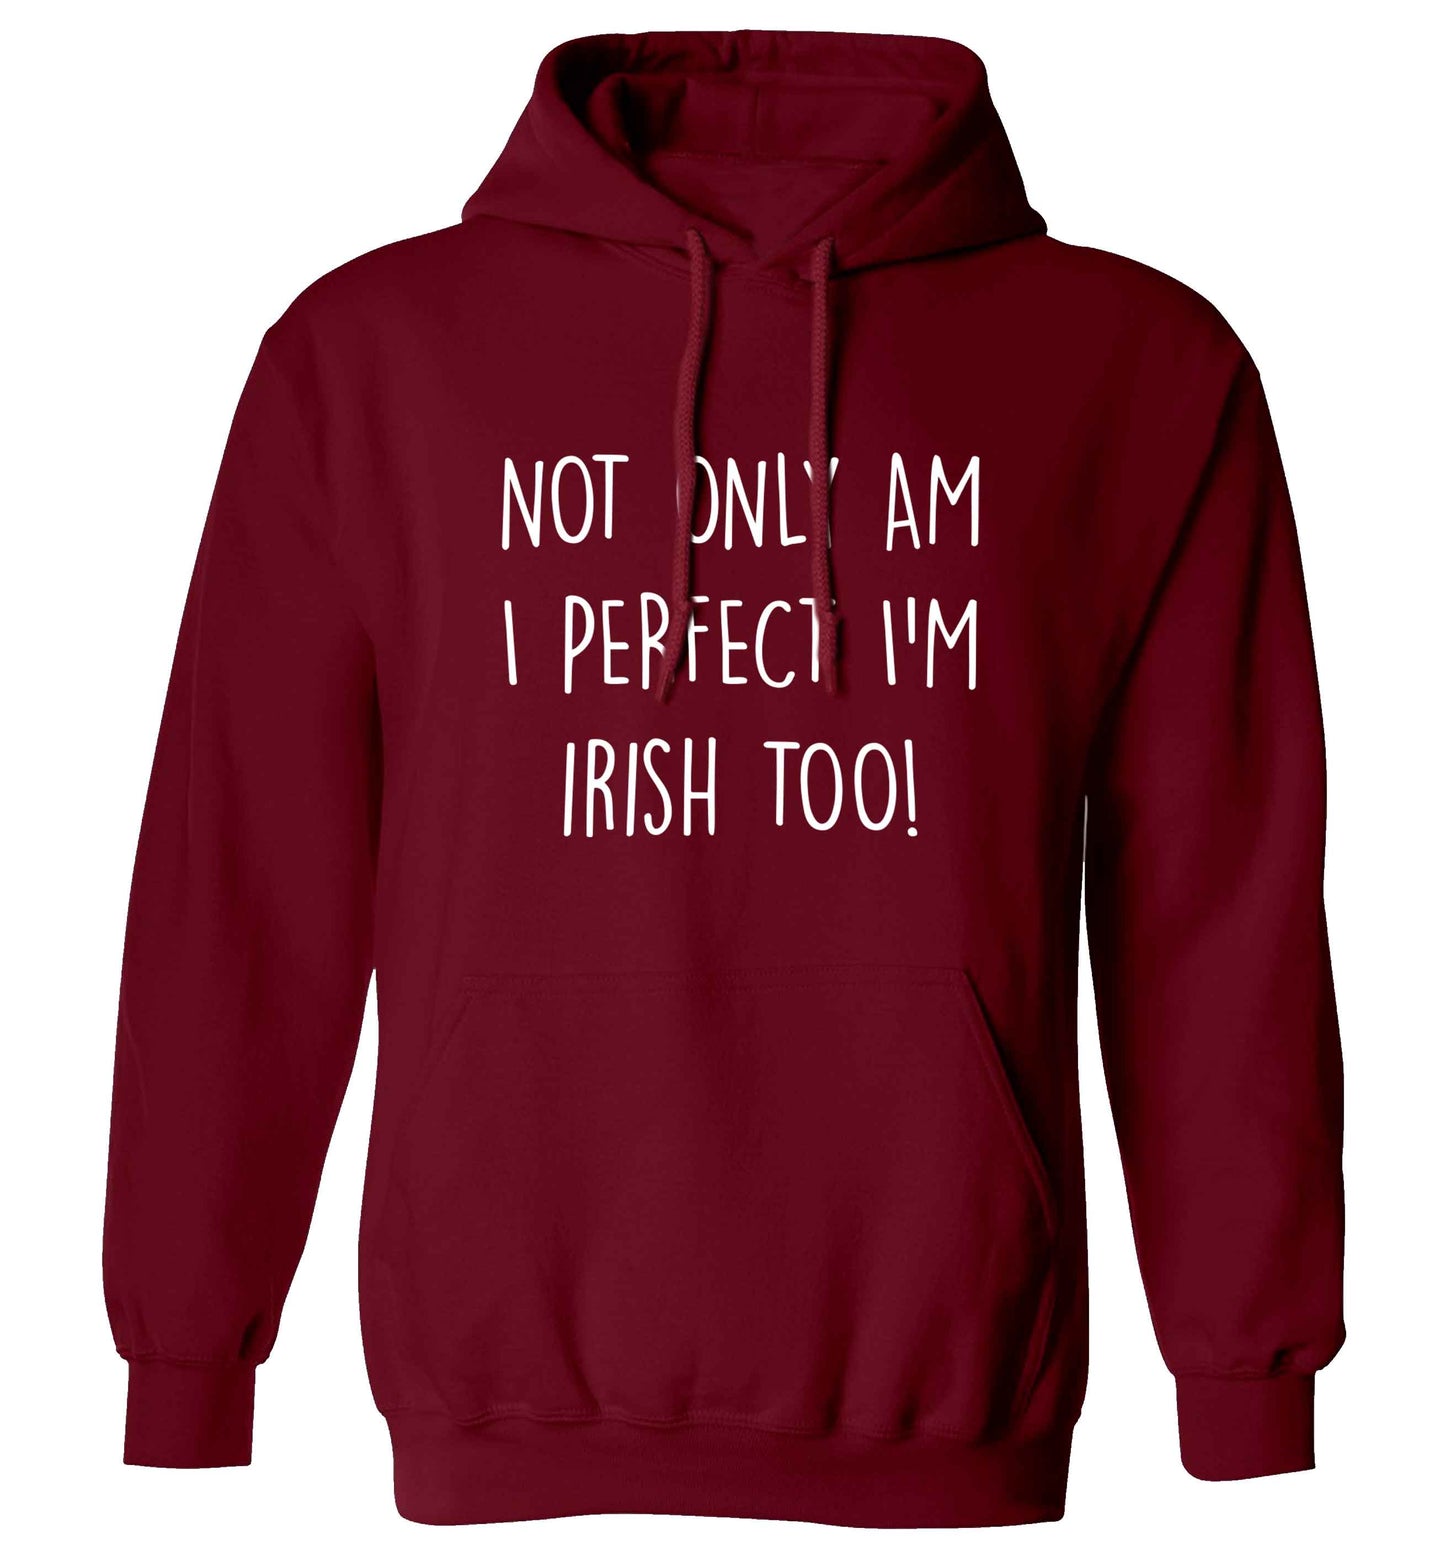 Not only am I perfect I'm Irish too! adults unisex maroon hoodie 2XL